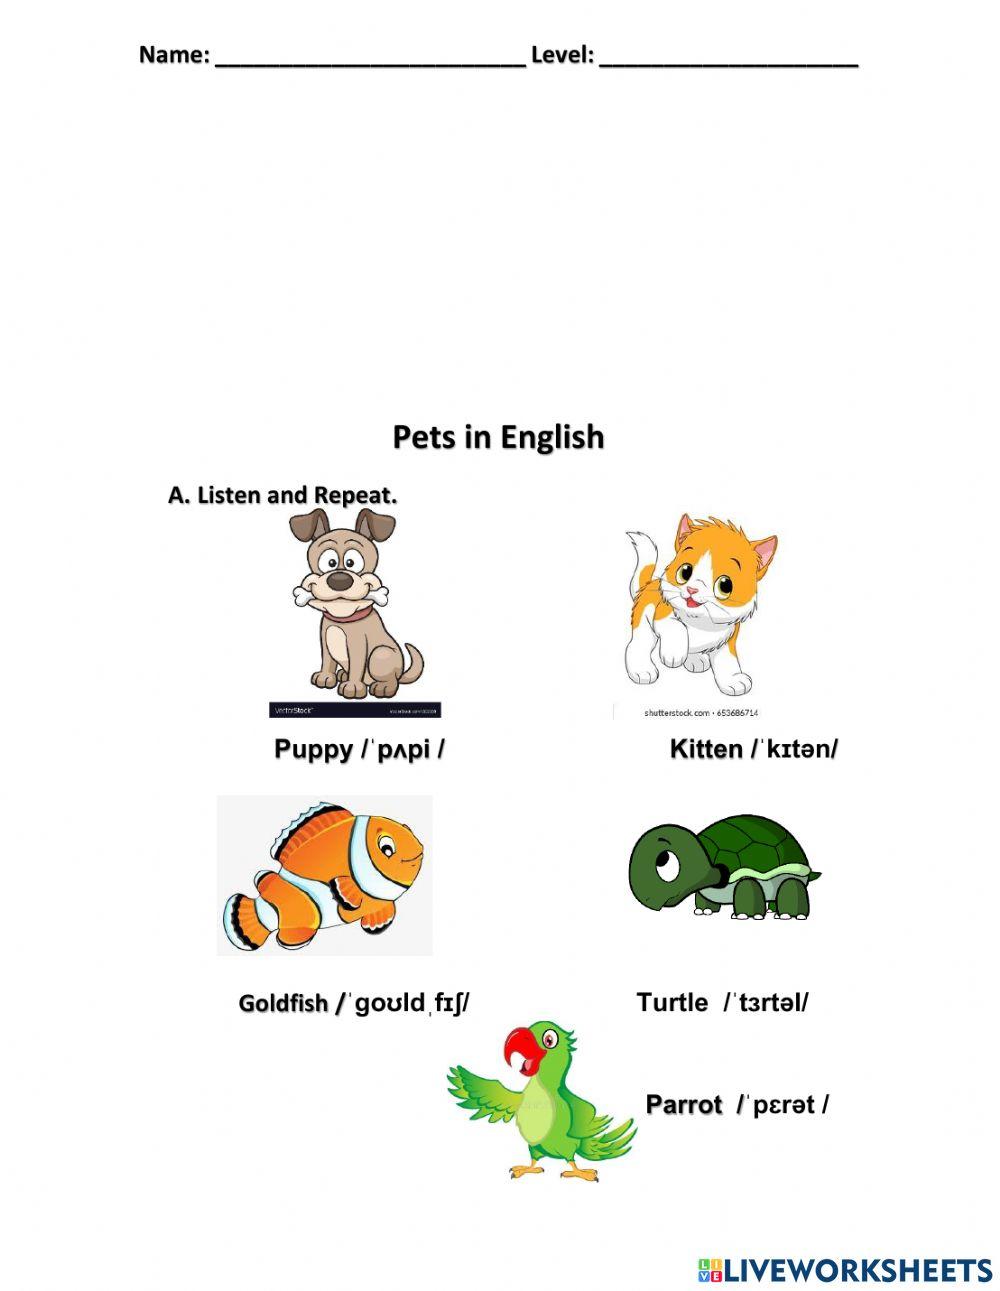 Pets in English